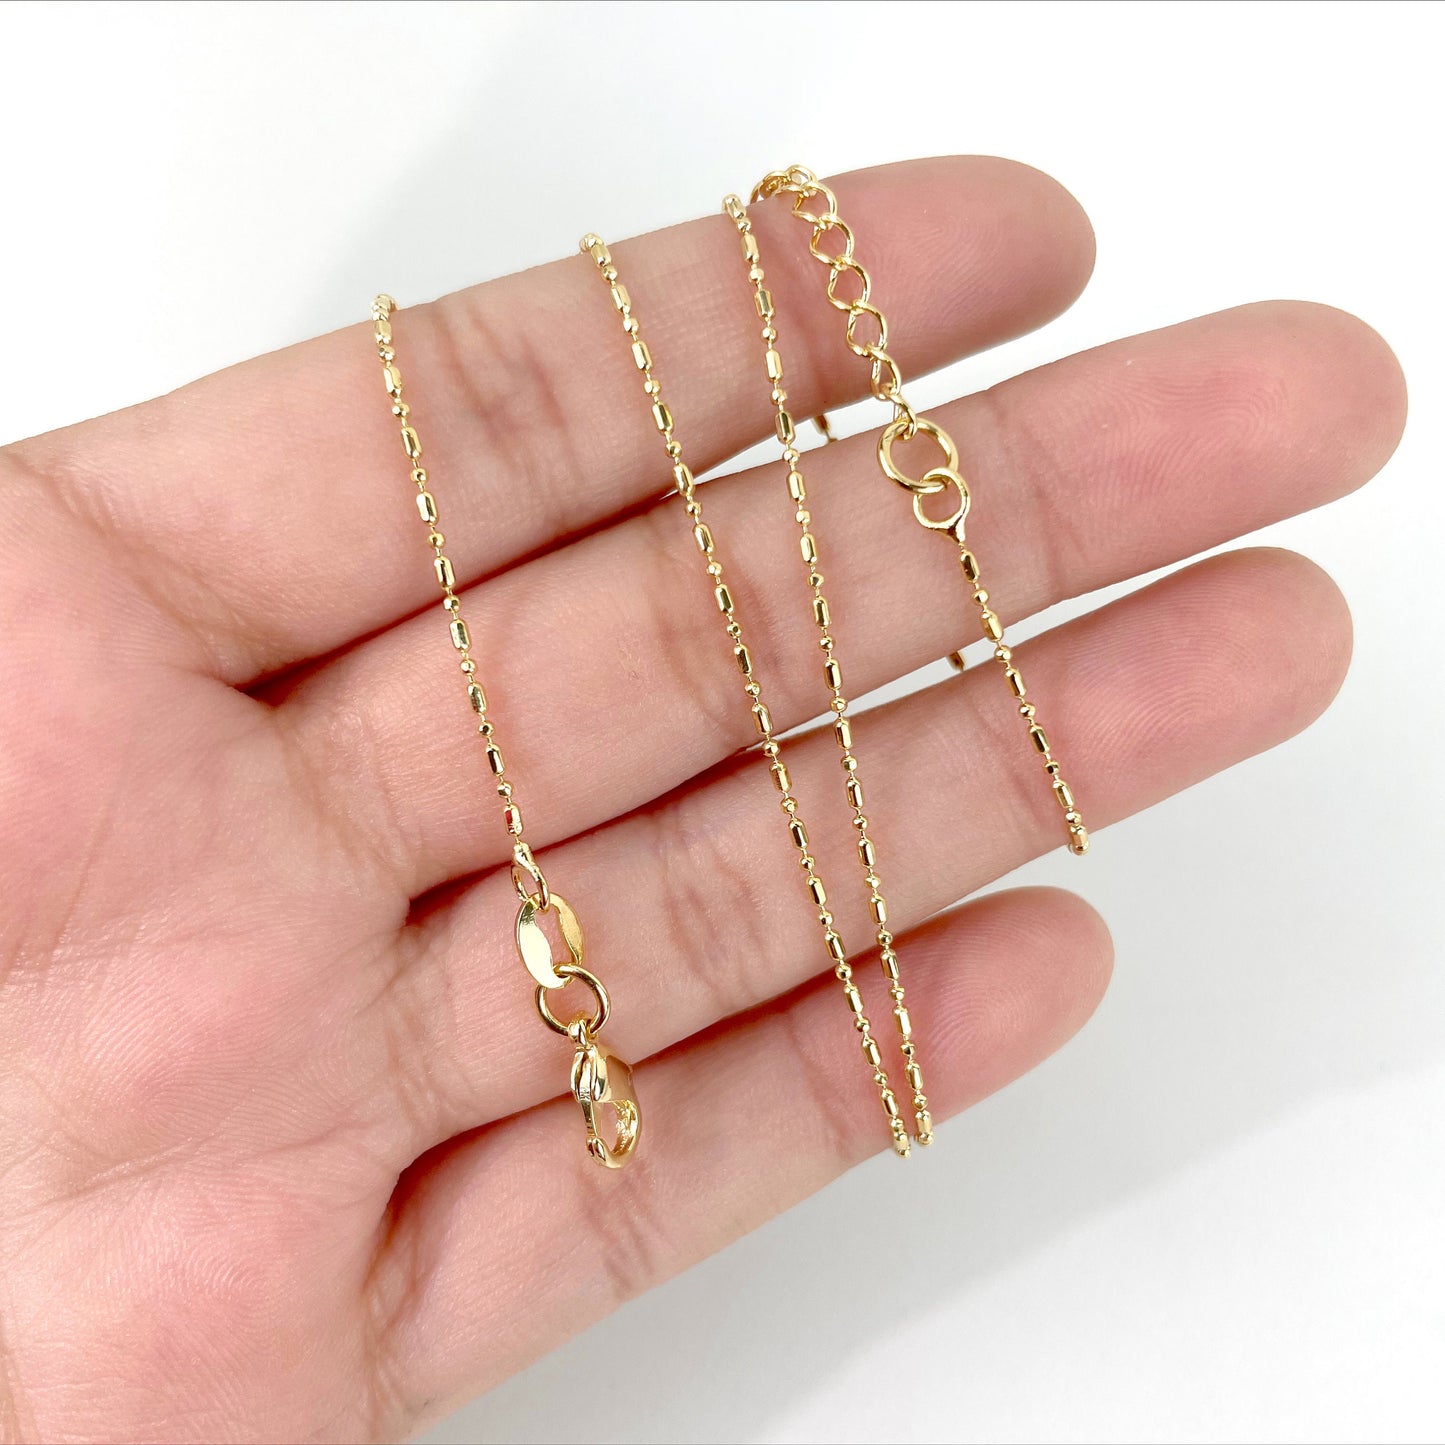 18k Gold Filled 1mm Thickness Dash Dot Link Chain, Dainty Chain Necklace for Wholesale Jewelry Making Supplies